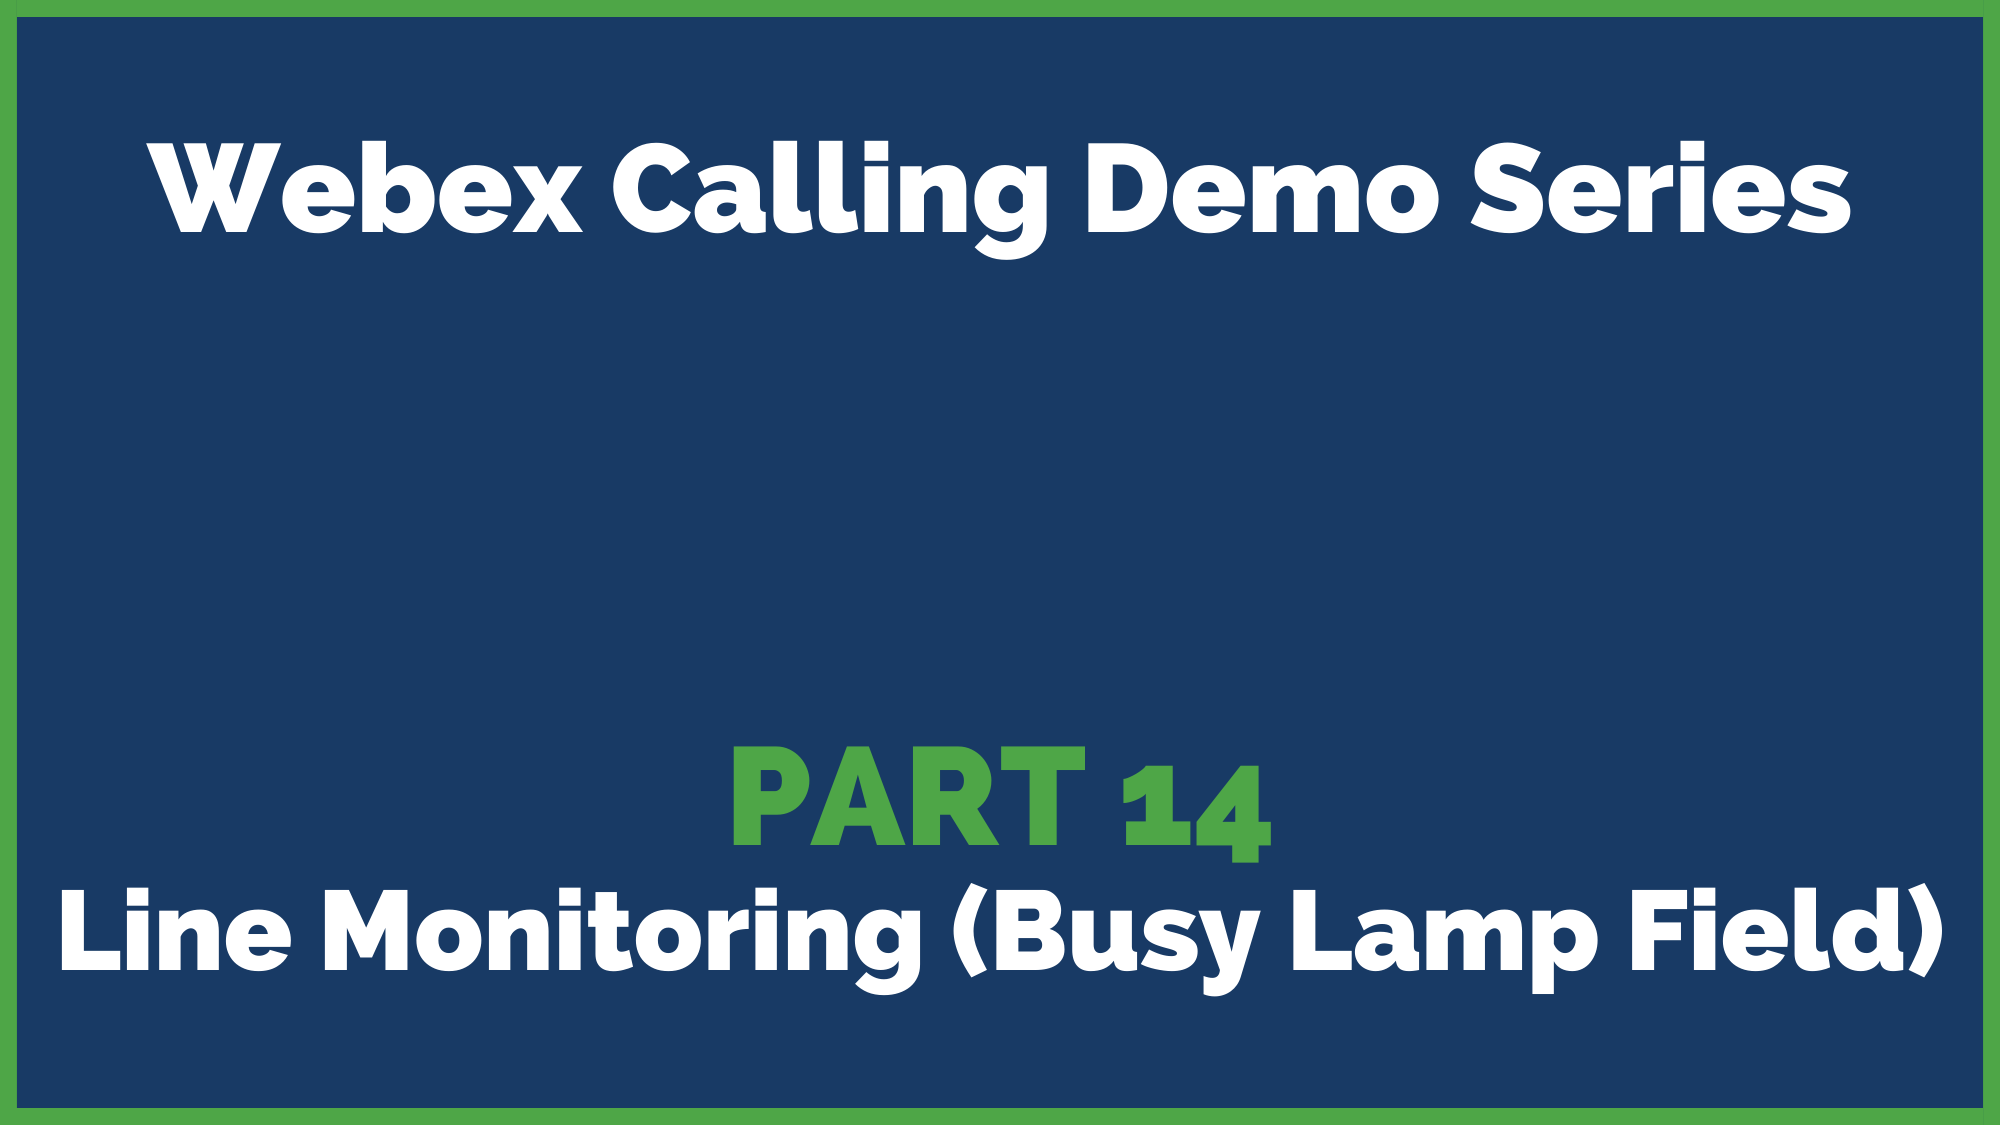 2022 Webex Calling Demo Series Part 14: Line Monitoring Busy Lamp Field